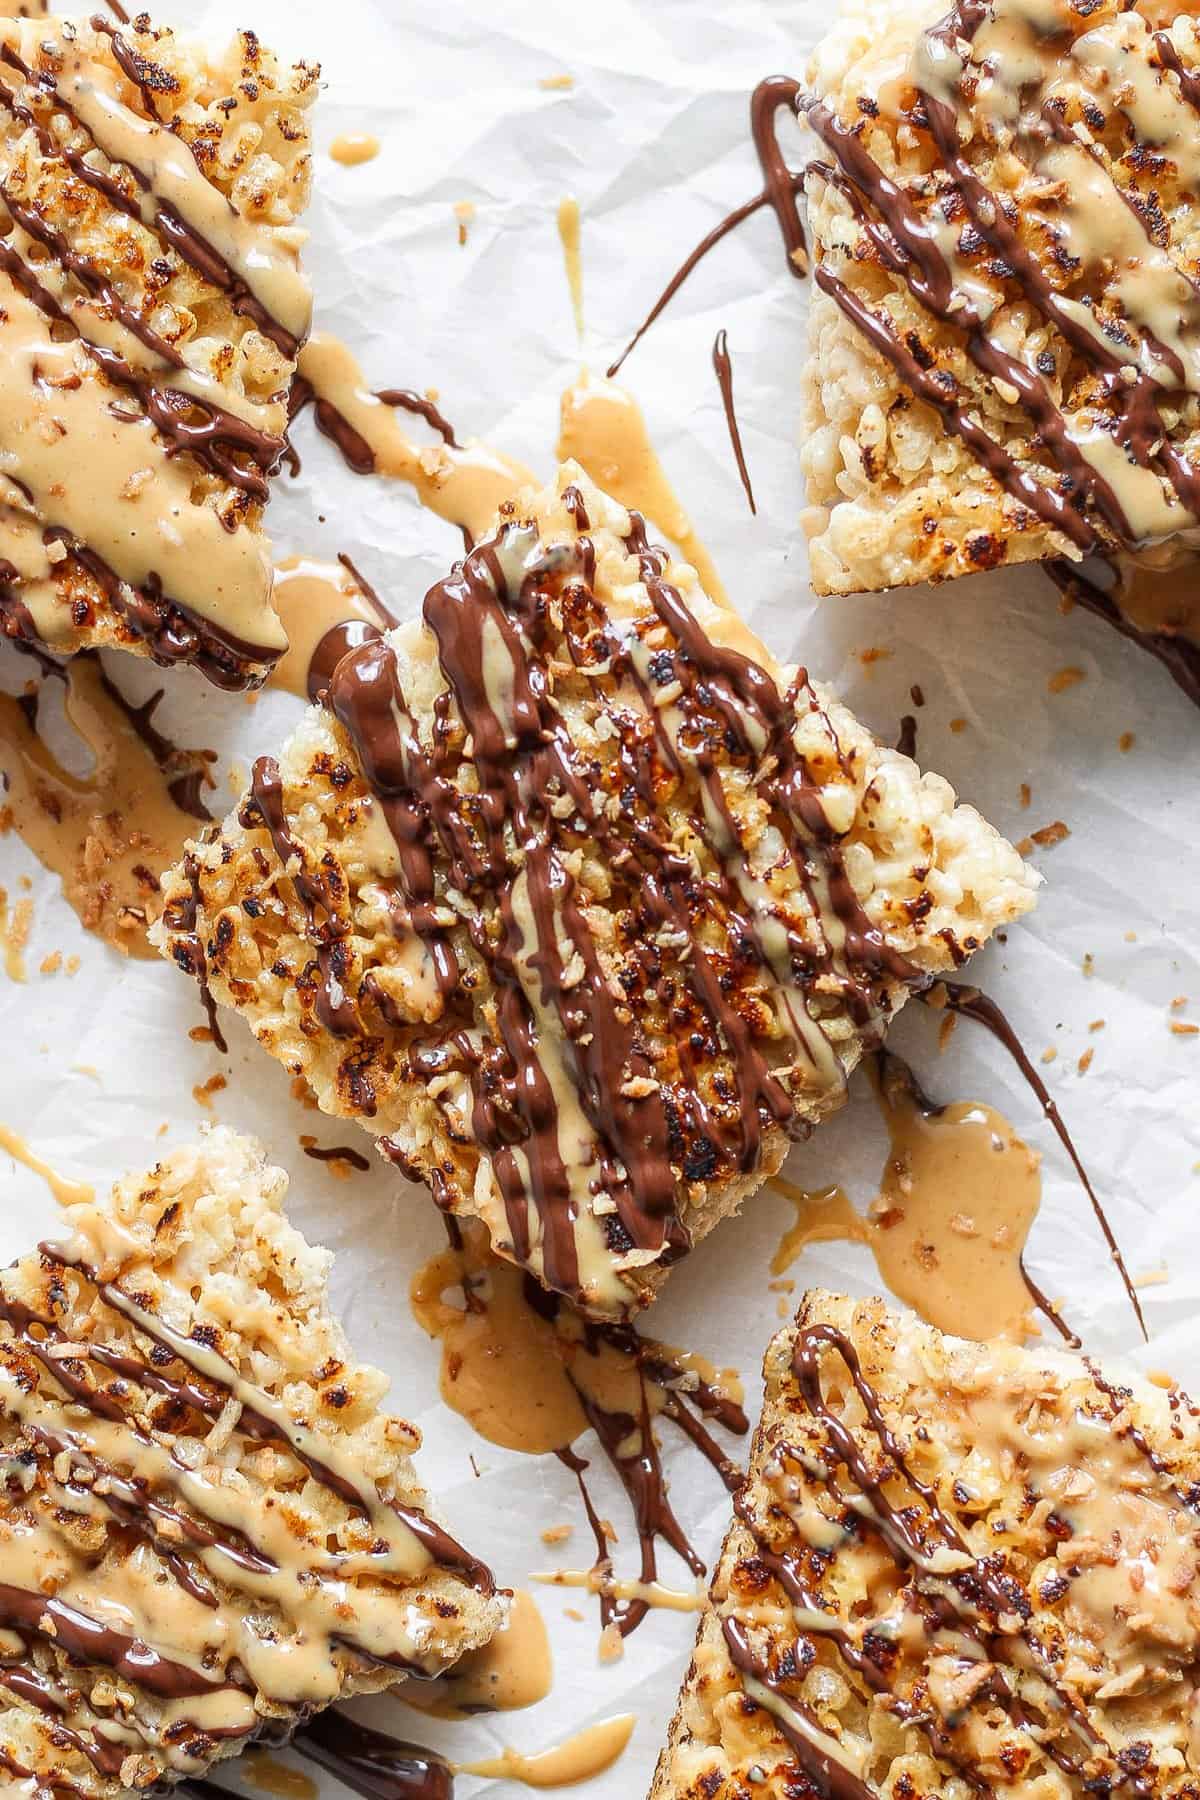 Close-up of five toasted Rice Krispie treats drizzled with chocolate and peanut butter, arranged on parchment paper. The treats are topped with crushed nuts.